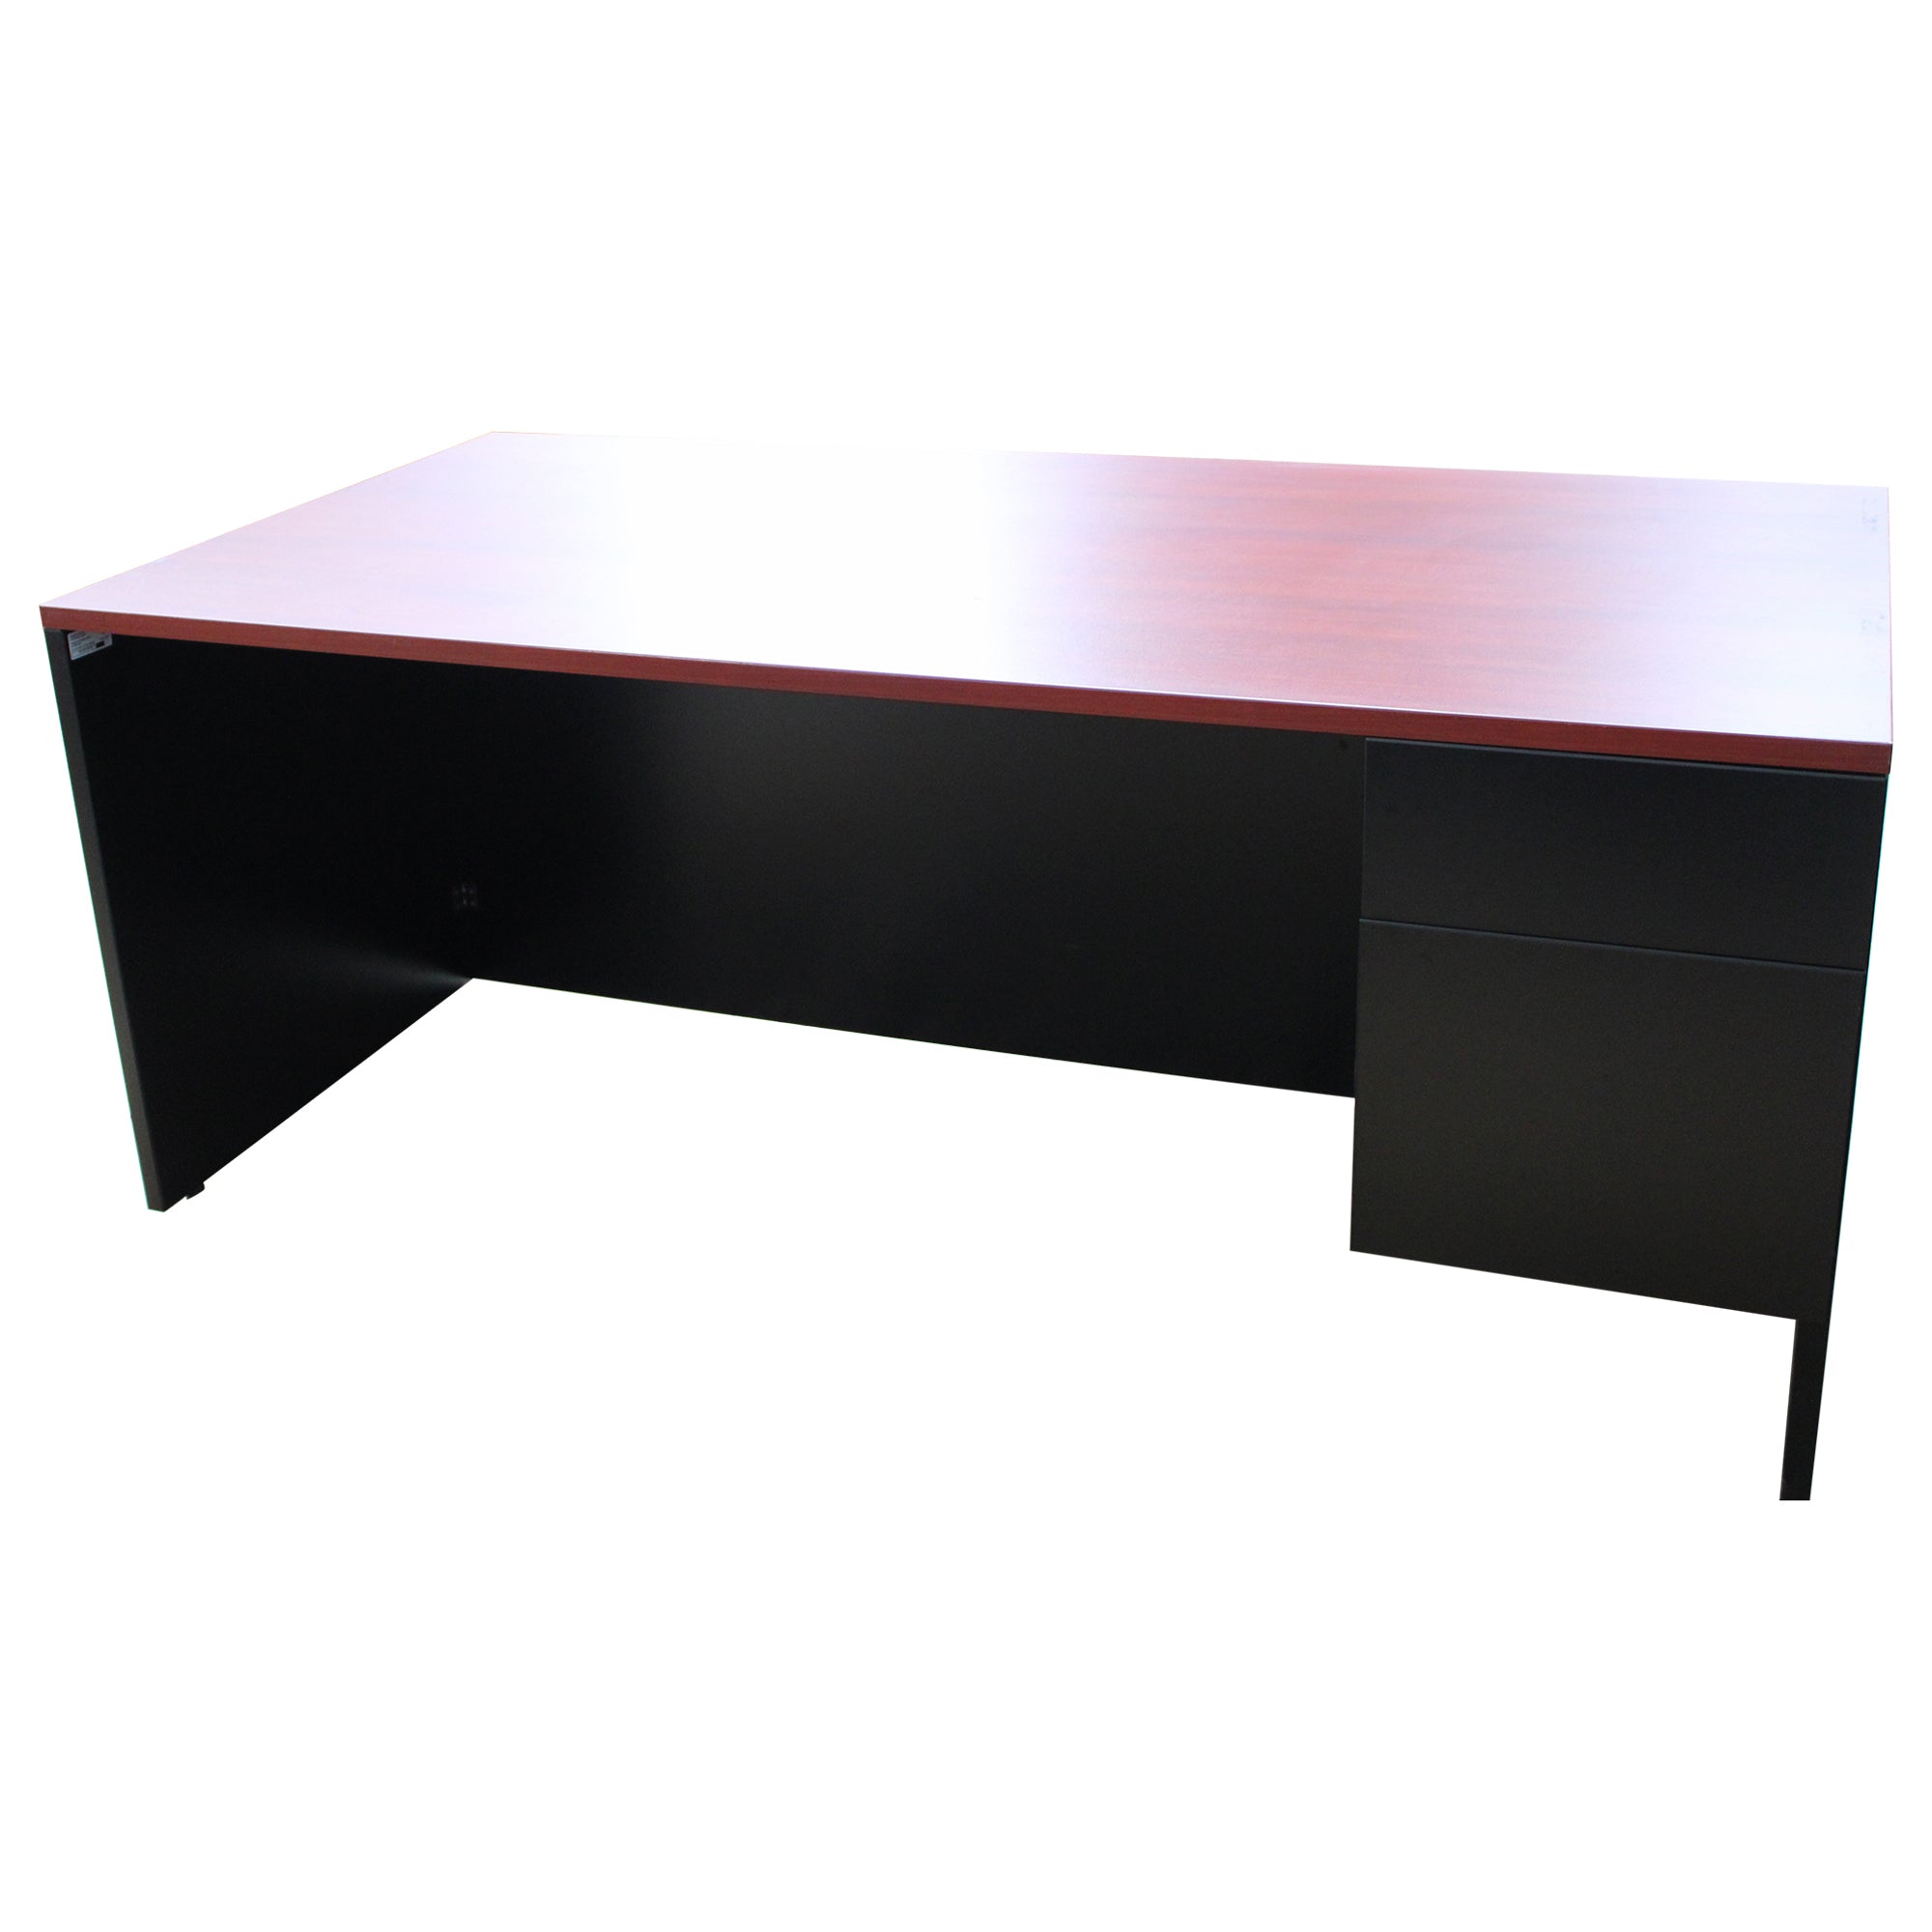 Single Ped Cherry Wood Desk - Right - Preowned